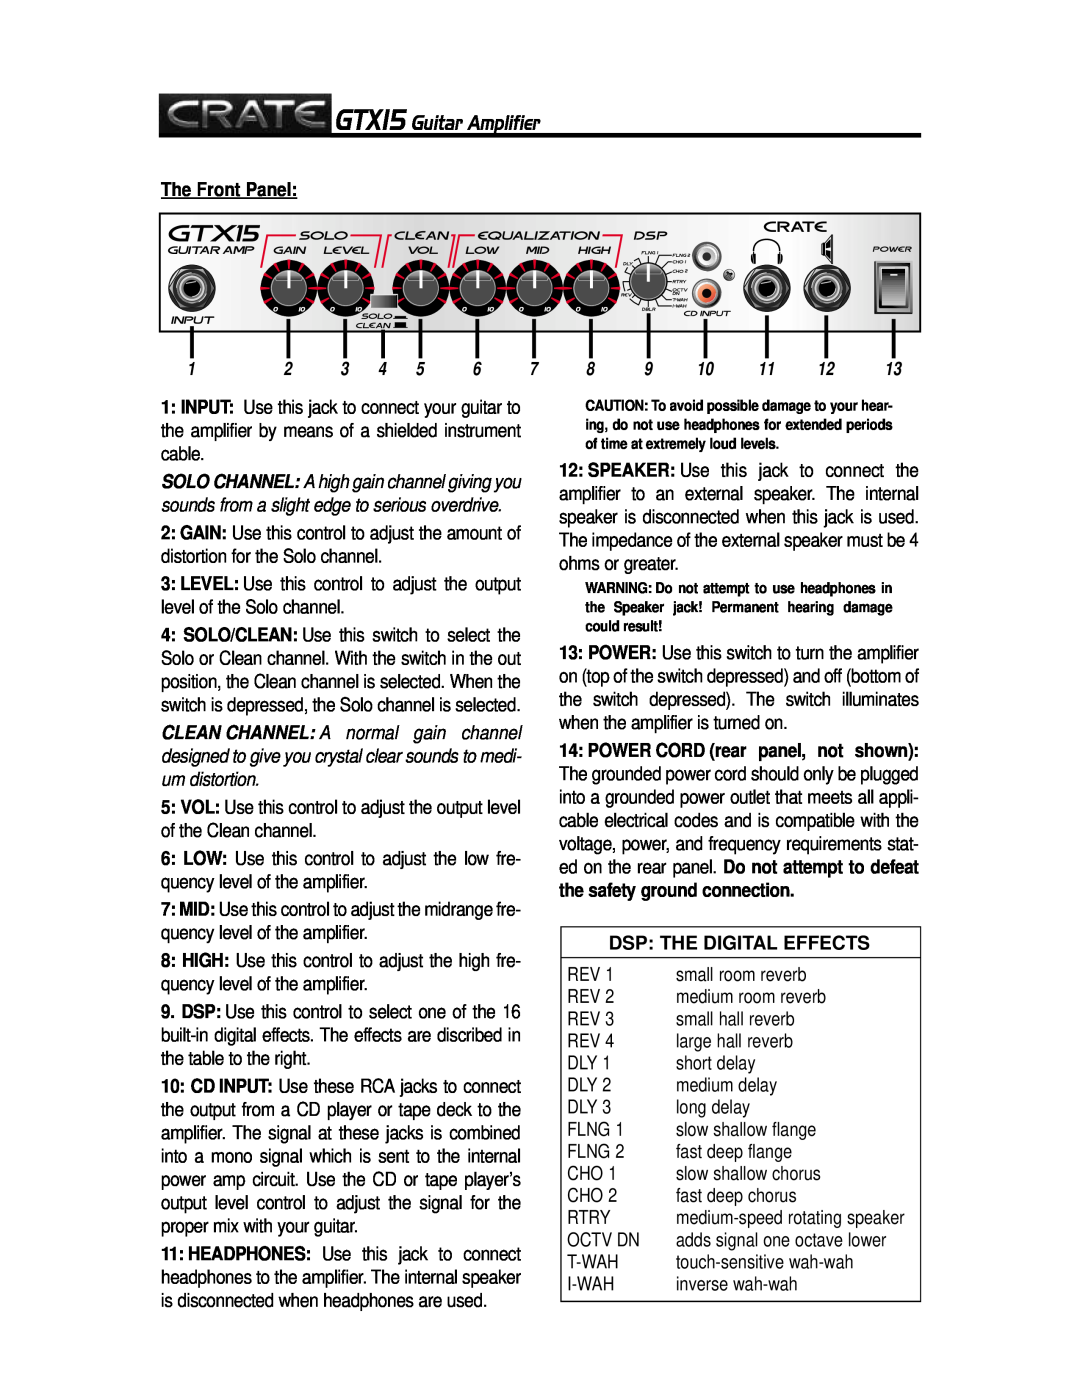 Crate Amplifiers manual The Front Panel, Dsp The Digital Effects, GTX15 Guitar Amplifier 